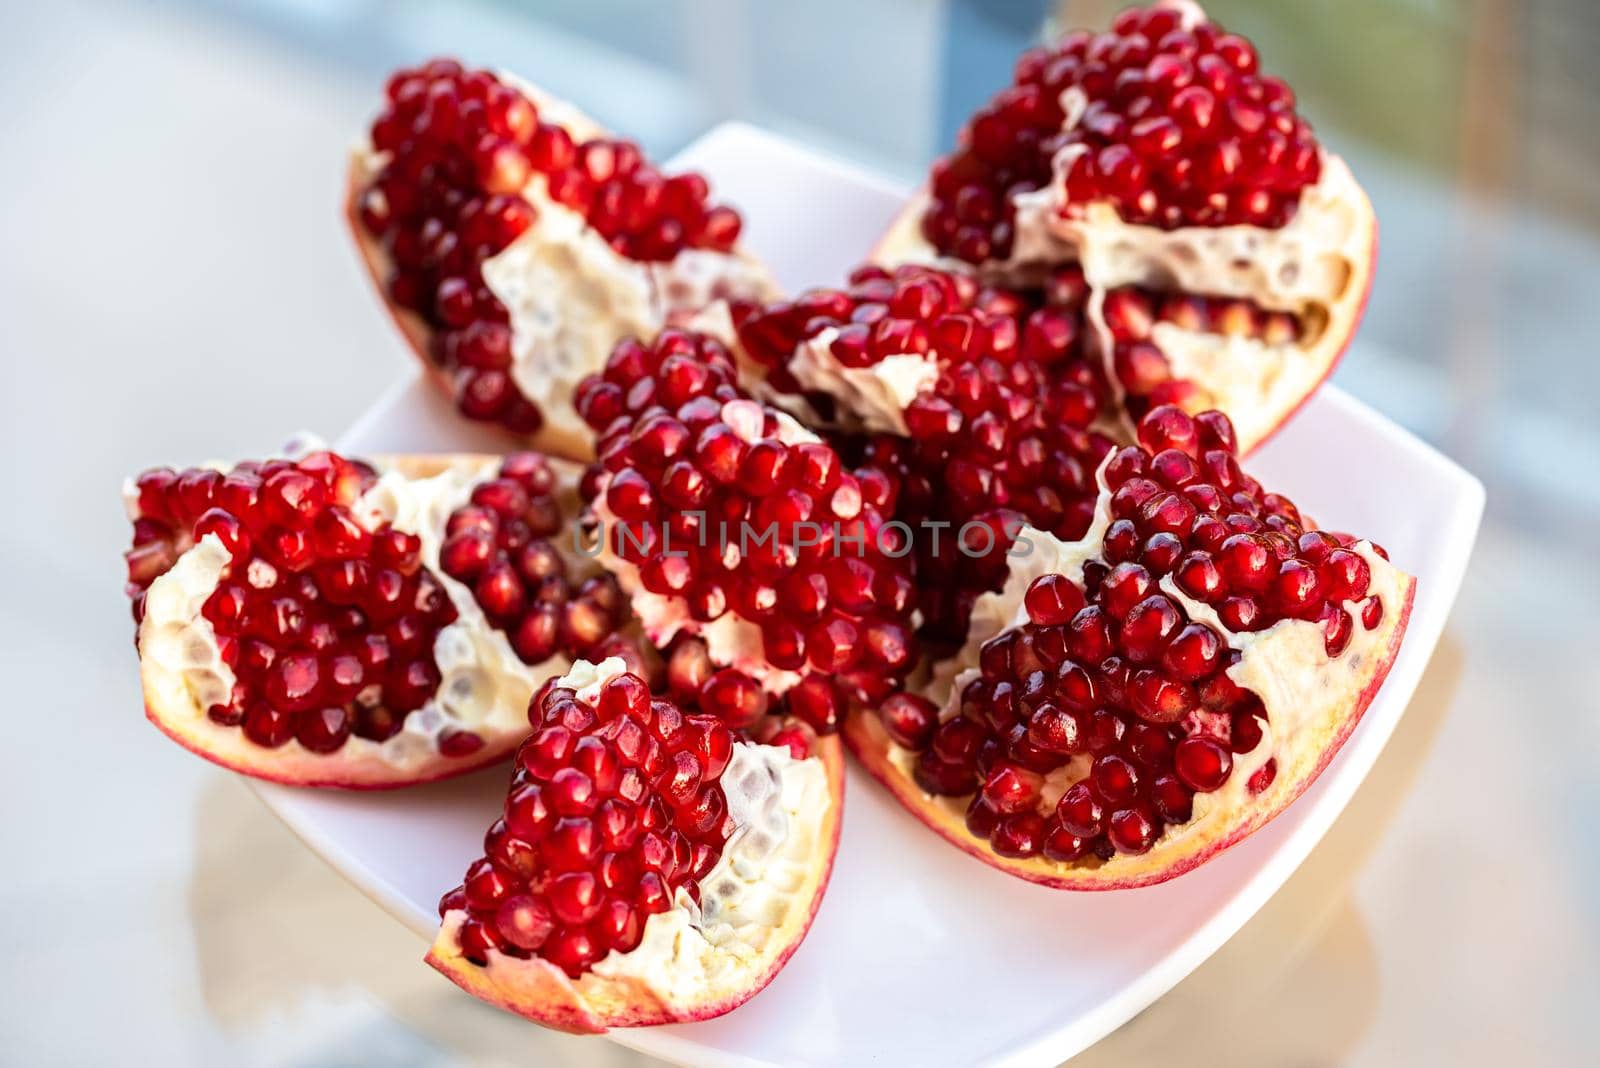 The fresh red tasty opened pomegranate on a white dish by Estival